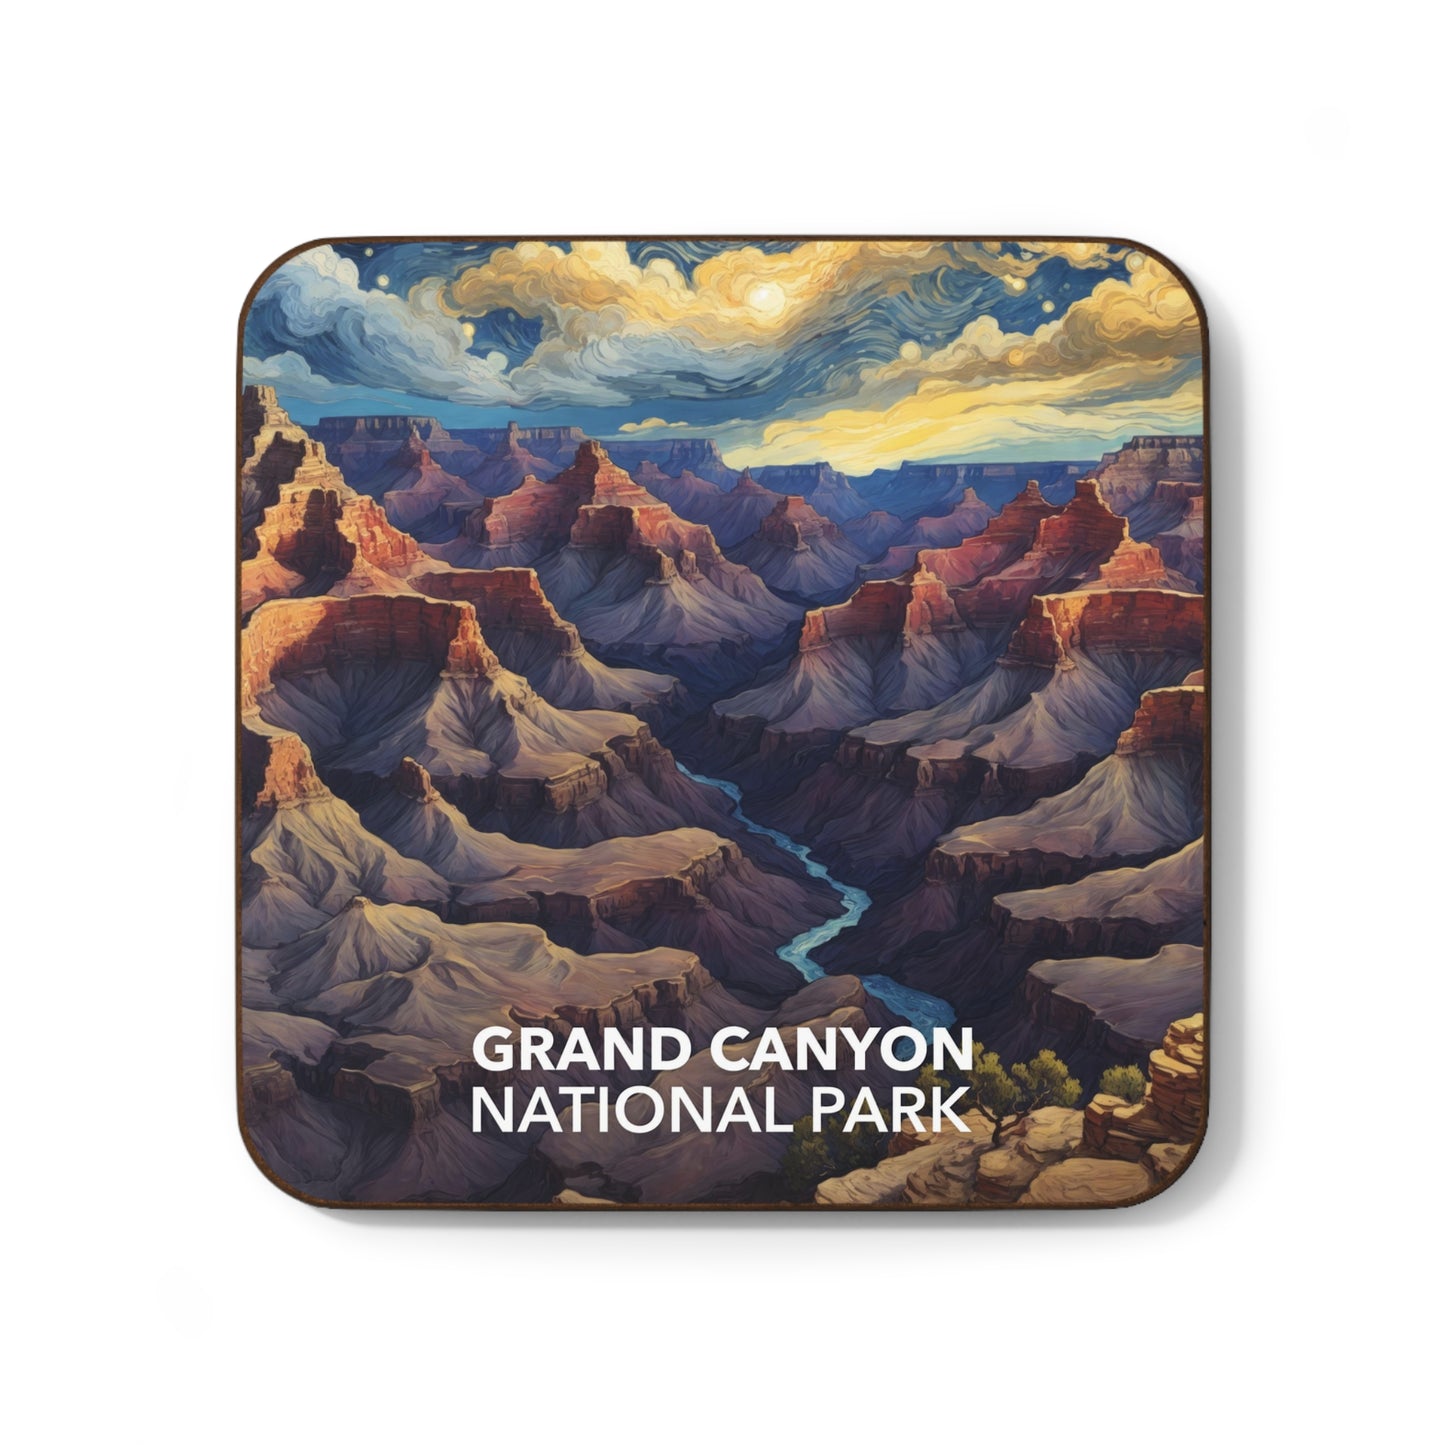 Grand Canyon National Park Coaster - The Starry Night